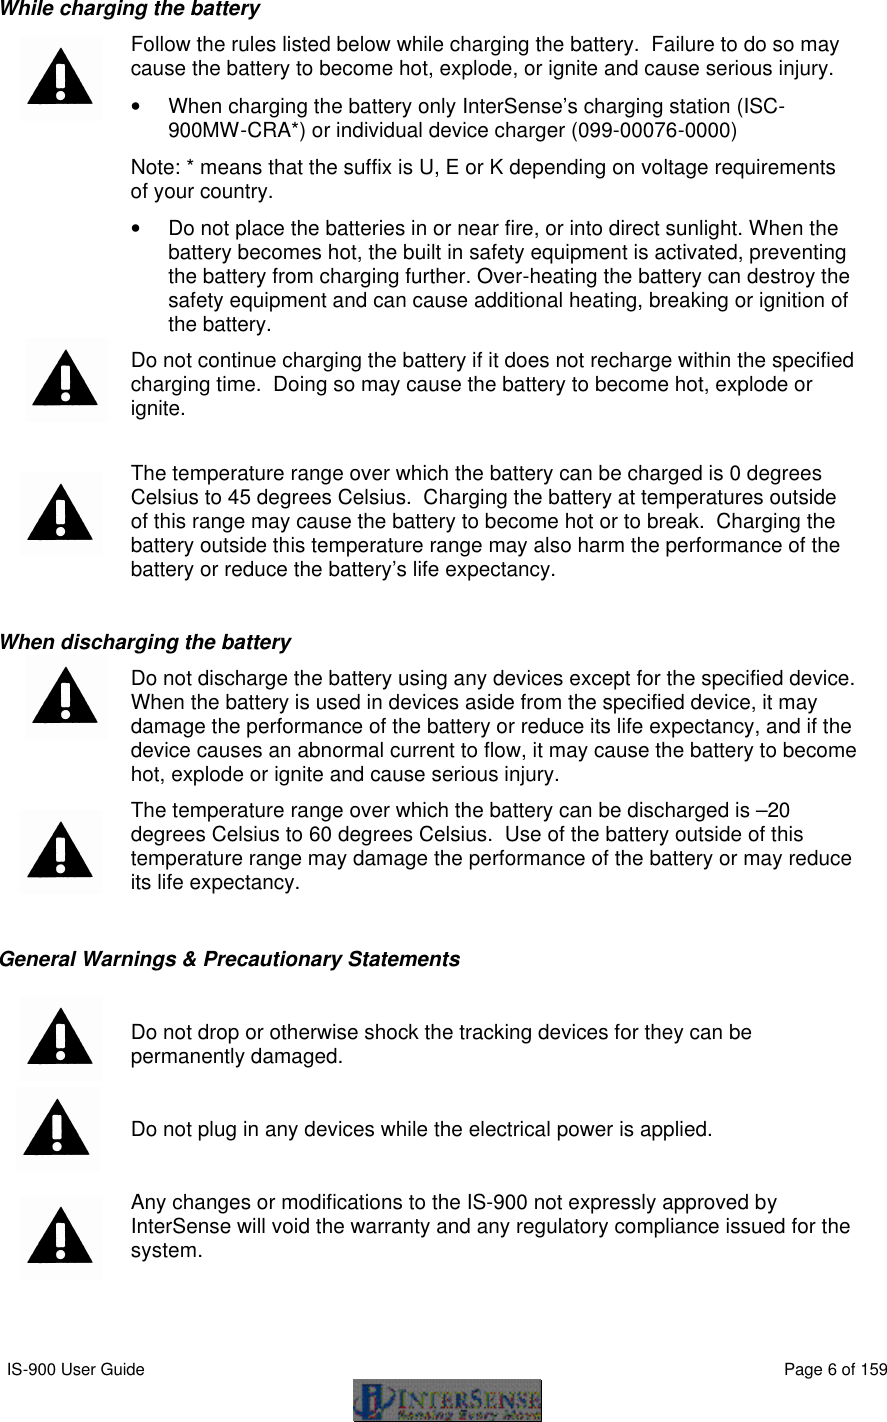  IS-900 User Guide                                                                                                                                          Page 6 of 159  While charging the battery  Follow the rules listed below while charging the battery.  Failure to do so may cause the battery to become hot, explode, or ignite and cause serious injury. • When charging the battery only InterSense’s charging station (ISC-900MW-CRA*) or individual device charger (099-00076-0000)   Note: * means that the suffix is U, E or K depending on voltage requirements of your country. • Do not place the batteries in or near fire, or into direct sunlight. When the battery becomes hot, the built in safety equipment is activated, preventing the battery from charging further. Over-heating the battery can destroy the safety equipment and can cause additional heating, breaking or ignition of the battery.  Do not continue charging the battery if it does not recharge within the specified charging time.  Doing so may cause the battery to become hot, explode or ignite.  The temperature range over which the battery can be charged is 0 degrees Celsius to 45 degrees Celsius.  Charging the battery at temperatures outside of this range may cause the battery to become hot or to break.  Charging the battery outside this temperature range may also harm the performance of the battery or reduce the battery’s life expectancy.  When discharging the battery  Do not discharge the battery using any devices except for the specified device.  When the battery is used in devices aside from the specified device, it may damage the performance of the battery or reduce its life expectancy, and if the device causes an abnormal current to flow, it may cause the battery to become hot, explode or ignite and cause serious injury.  The temperature range over which the battery can be discharged is –20 degrees Celsius to 60 degrees Celsius.  Use of the battery outside of this temperature range may damage the performance of the battery or may reduce its life expectancy.  General Warnings &amp; Precautionary Statements   Do not drop or otherwise shock the tracking devices for they can be permanently damaged.  Do not plug in any devices while the electrical power is applied.   Any changes or modifications to the IS-900 not expressly approved by InterSense will void the warranty and any regulatory compliance issued for the system. 